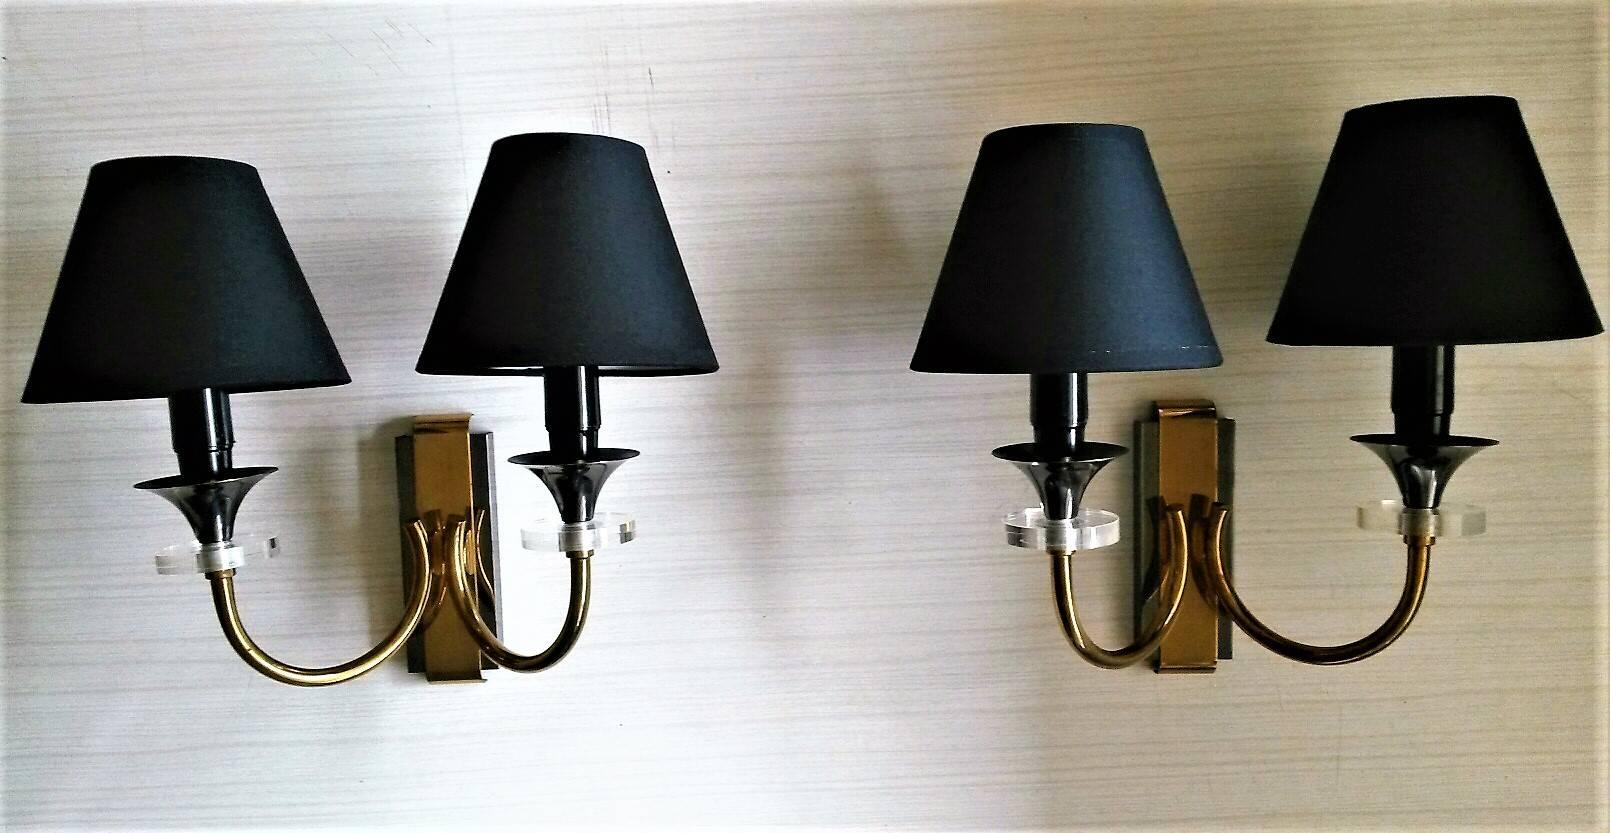 Beautiful pairs of two-arm gilt bronze sconces appliques by Maison Jansen presenting two different patinas in gilt bronze and gun metal and charming details of clear discs of Lucite glass under each cup.
(Making a great rare to find set of four